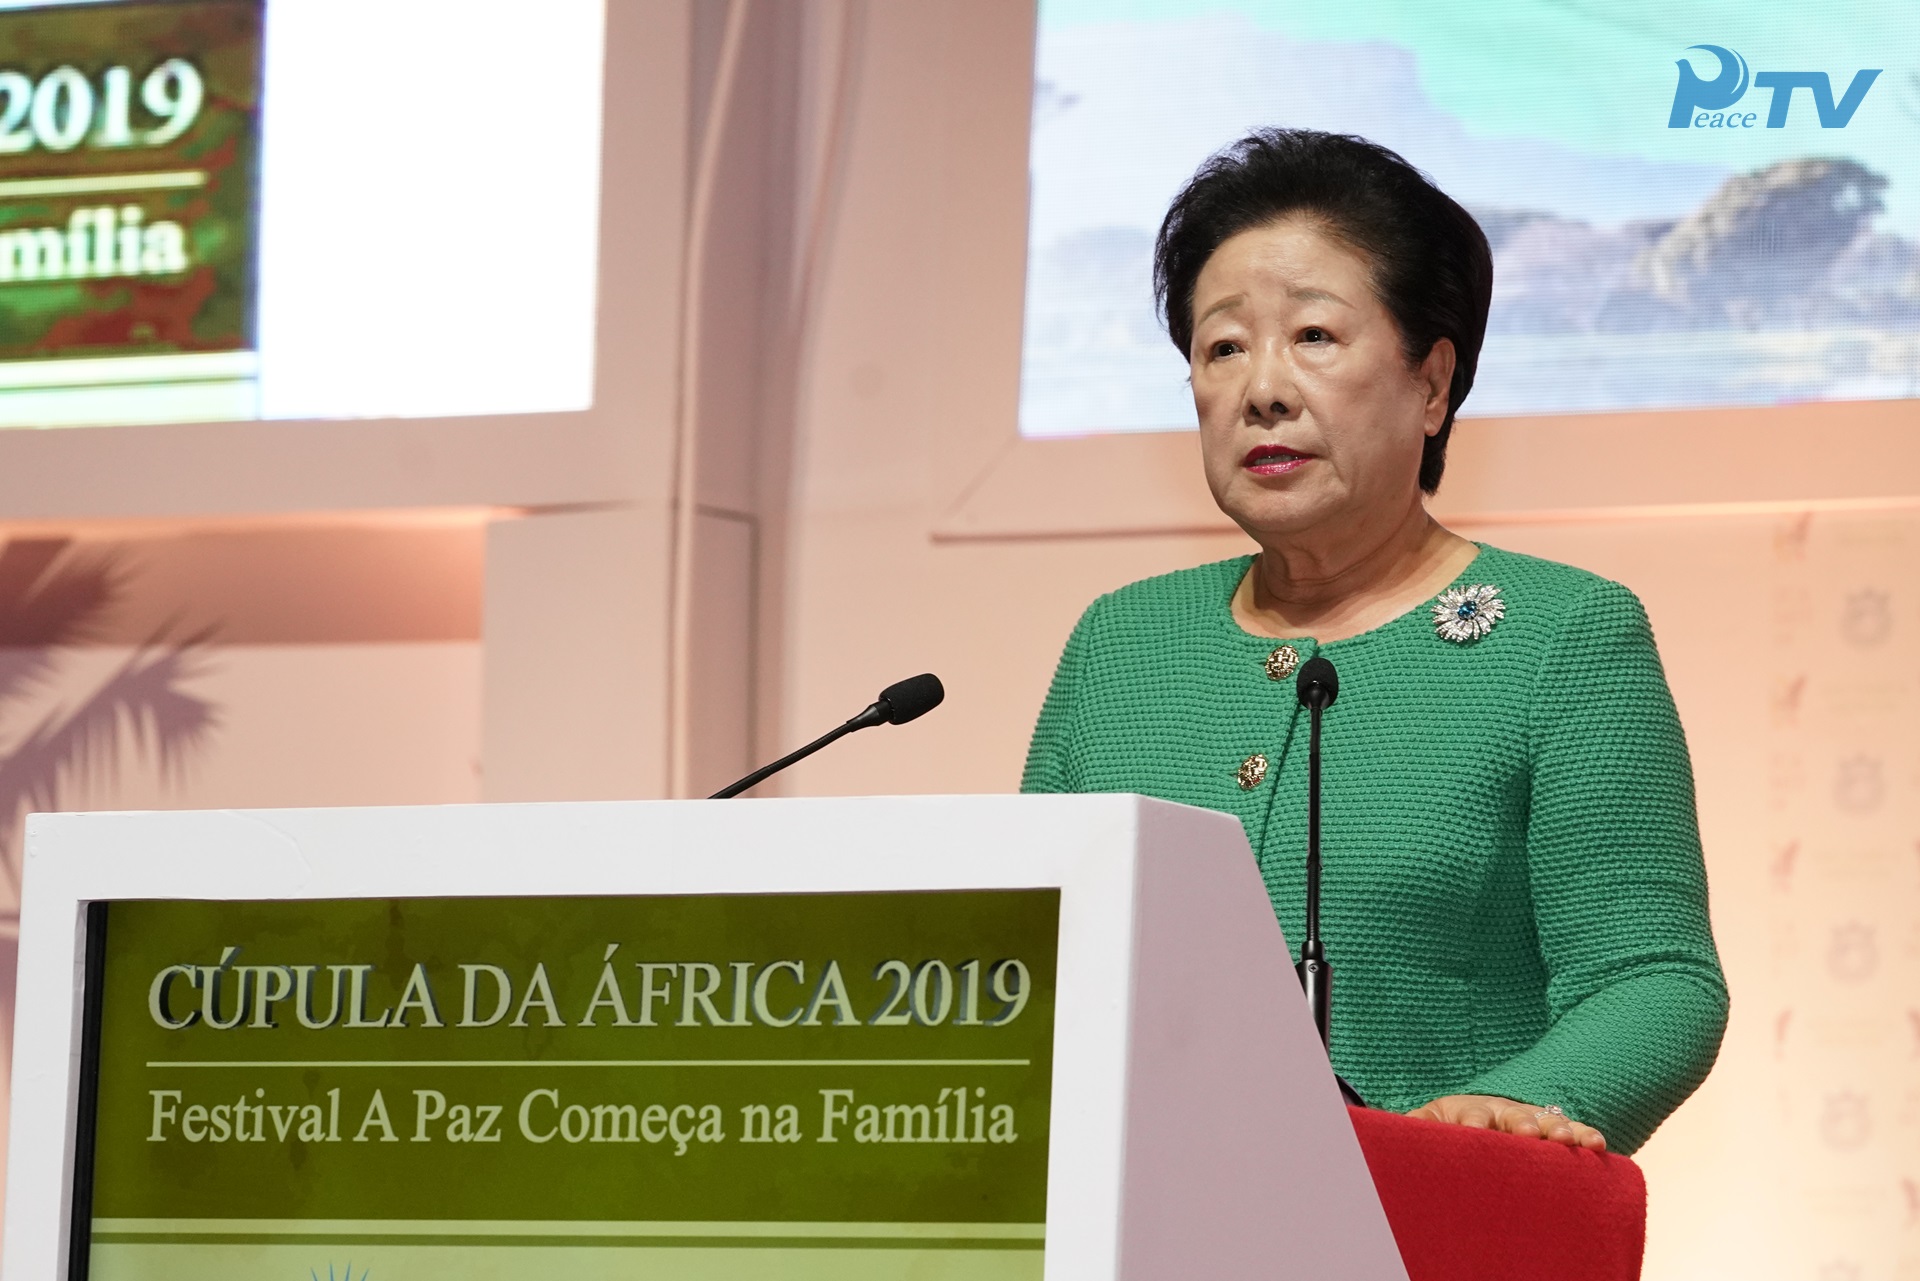 Africa Summit in Sao Tome and Principe  (Sept. 5, 2019)